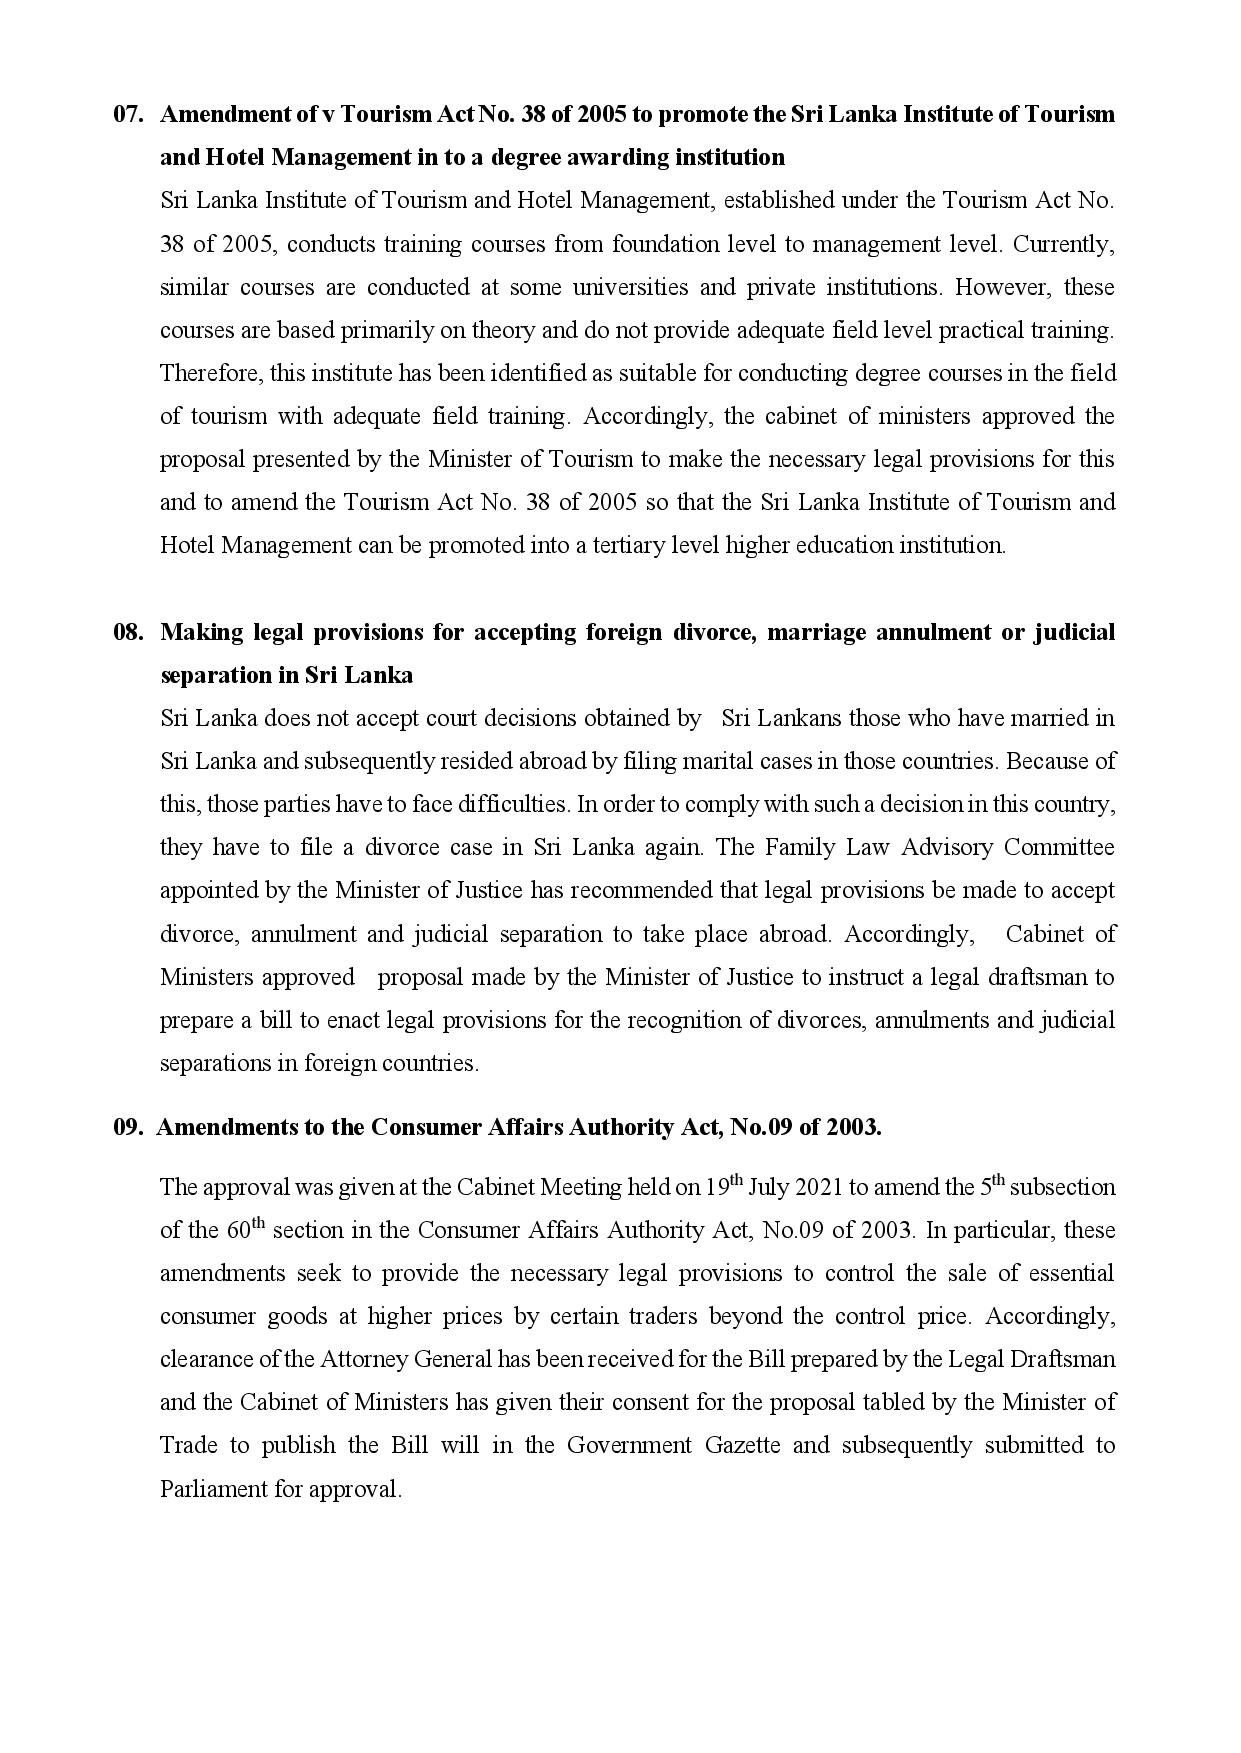 Cabinet Decisions on 09.08.2021 English page 003